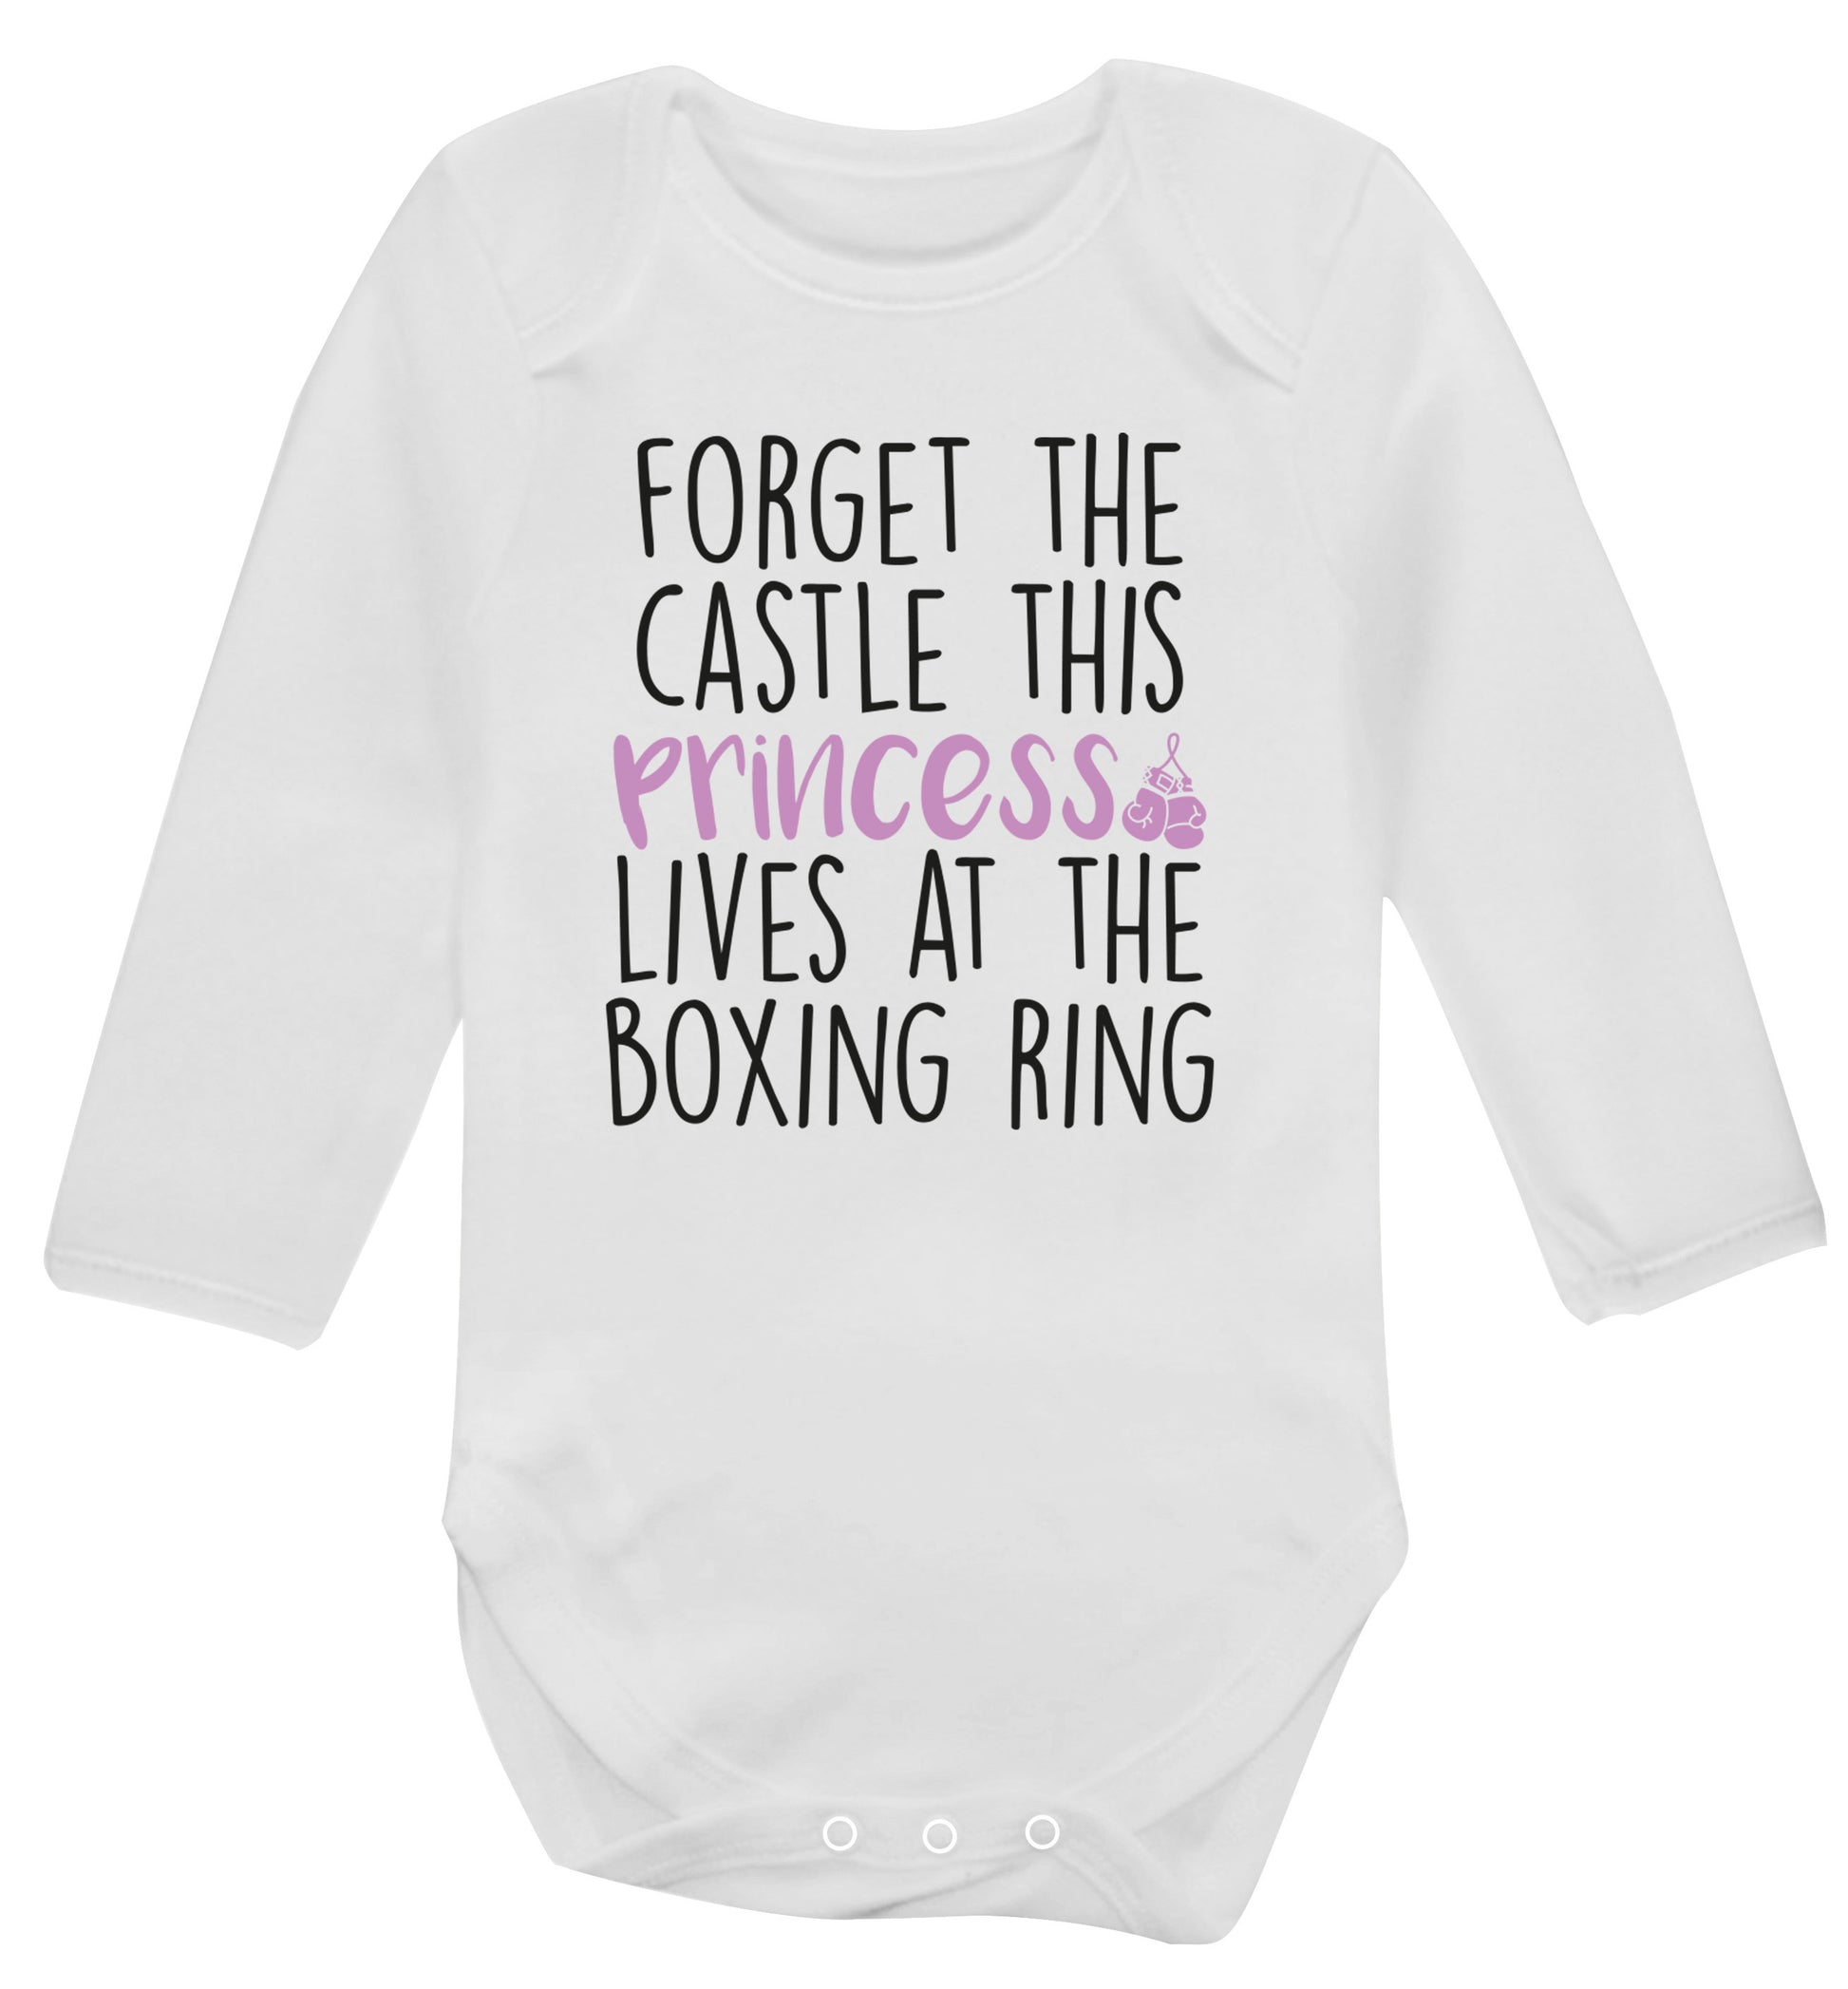 Forget the castle this princess lives at the boxing ring Baby Vest long sleeved white 6-12 months